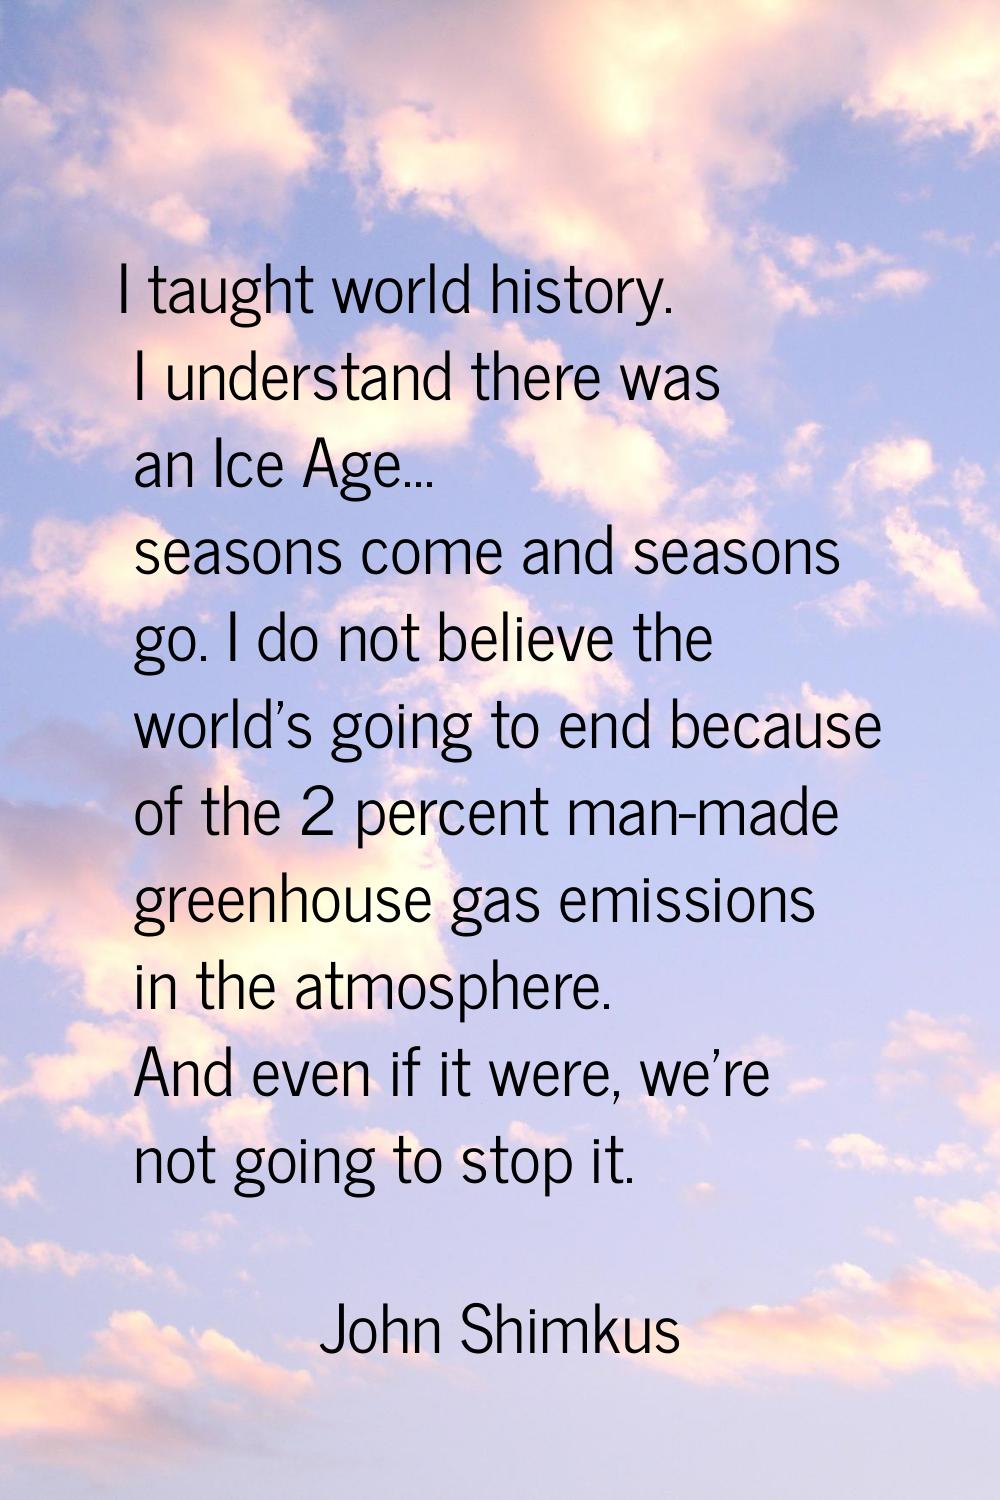 I taught world history. I understand there was an Ice Age... seasons come and seasons go. I do not 